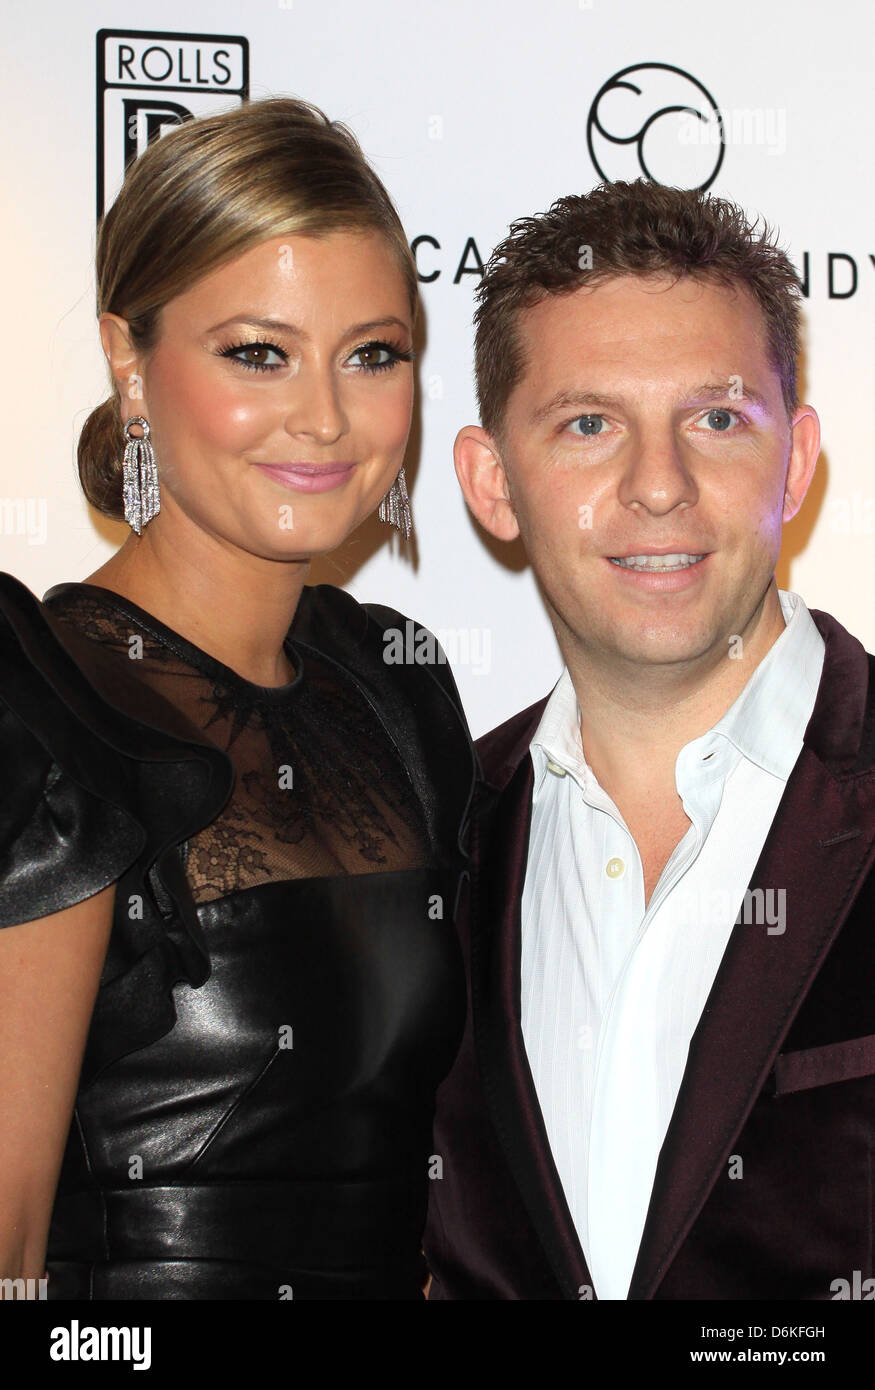 Holly Valance and boyfriend Nick Candy Candy & Candy: The Art of Design - book launch party London, England - 26.10.11 Stock Photo